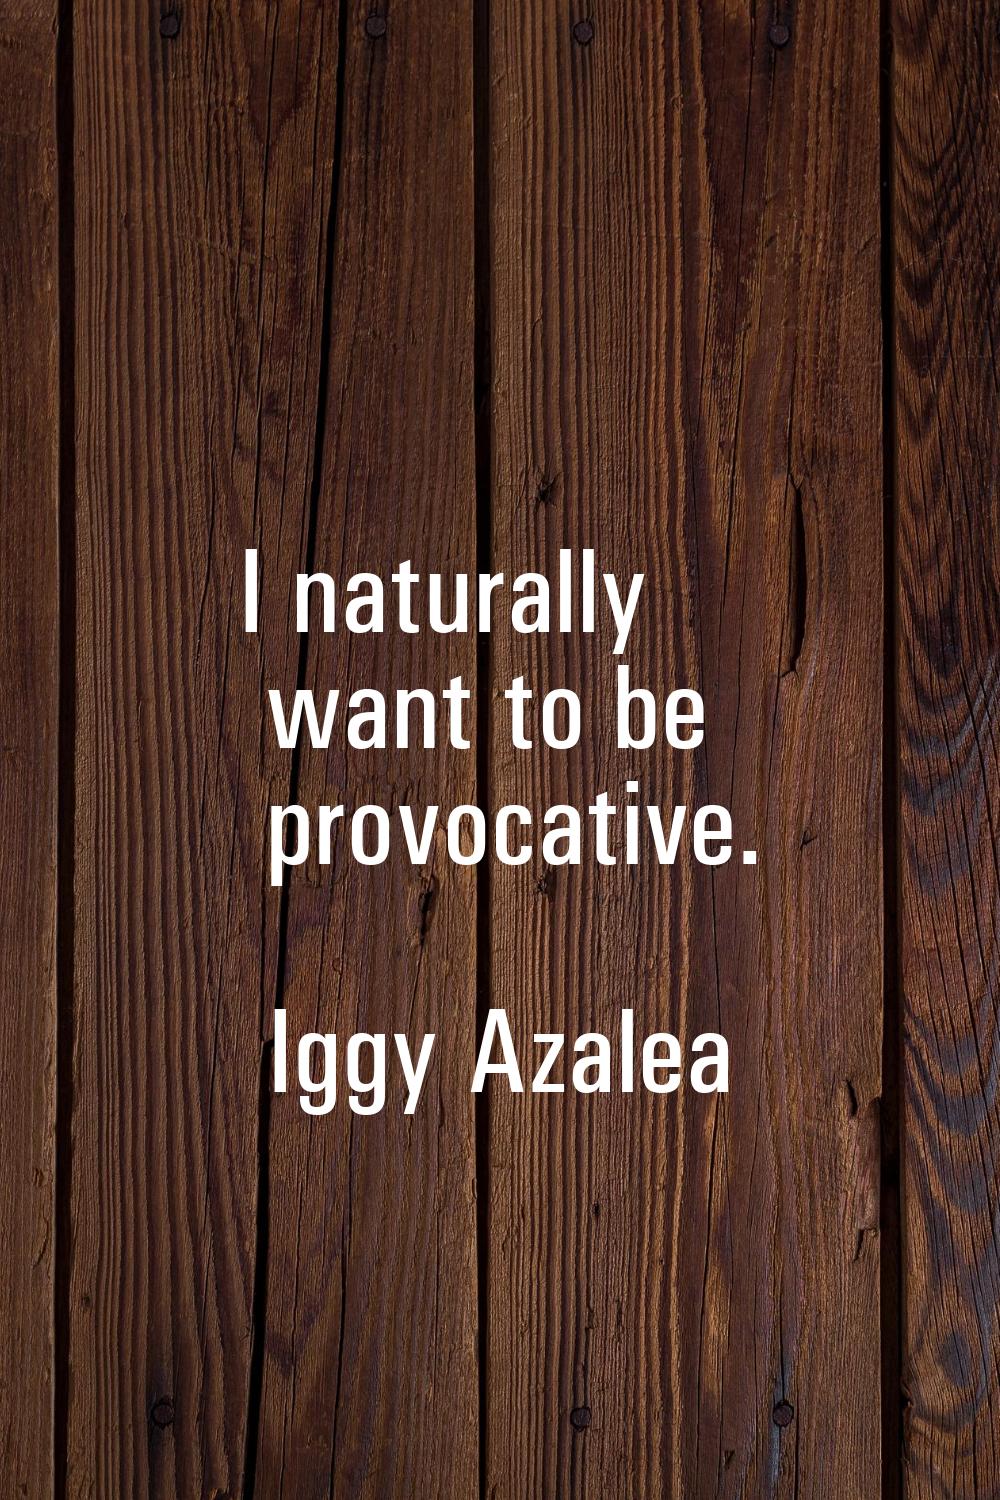 I naturally want to be provocative.